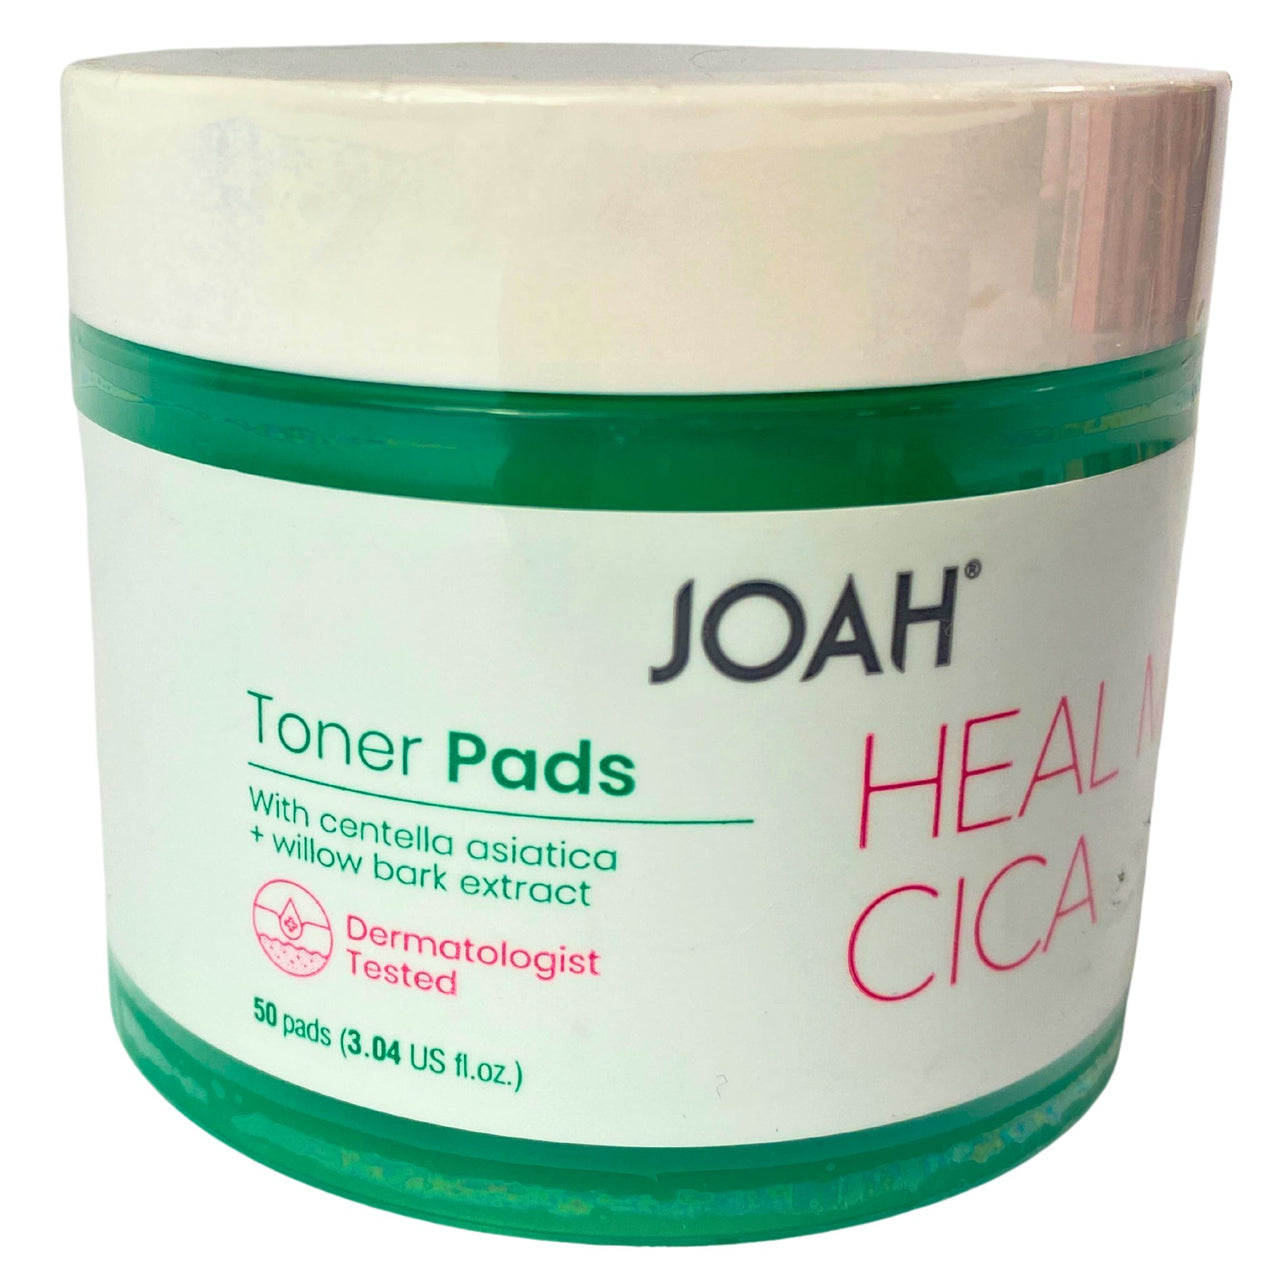 JOAH Heal Me Cica Toner Pads with Centella Asiatica + Willow Bark Extract